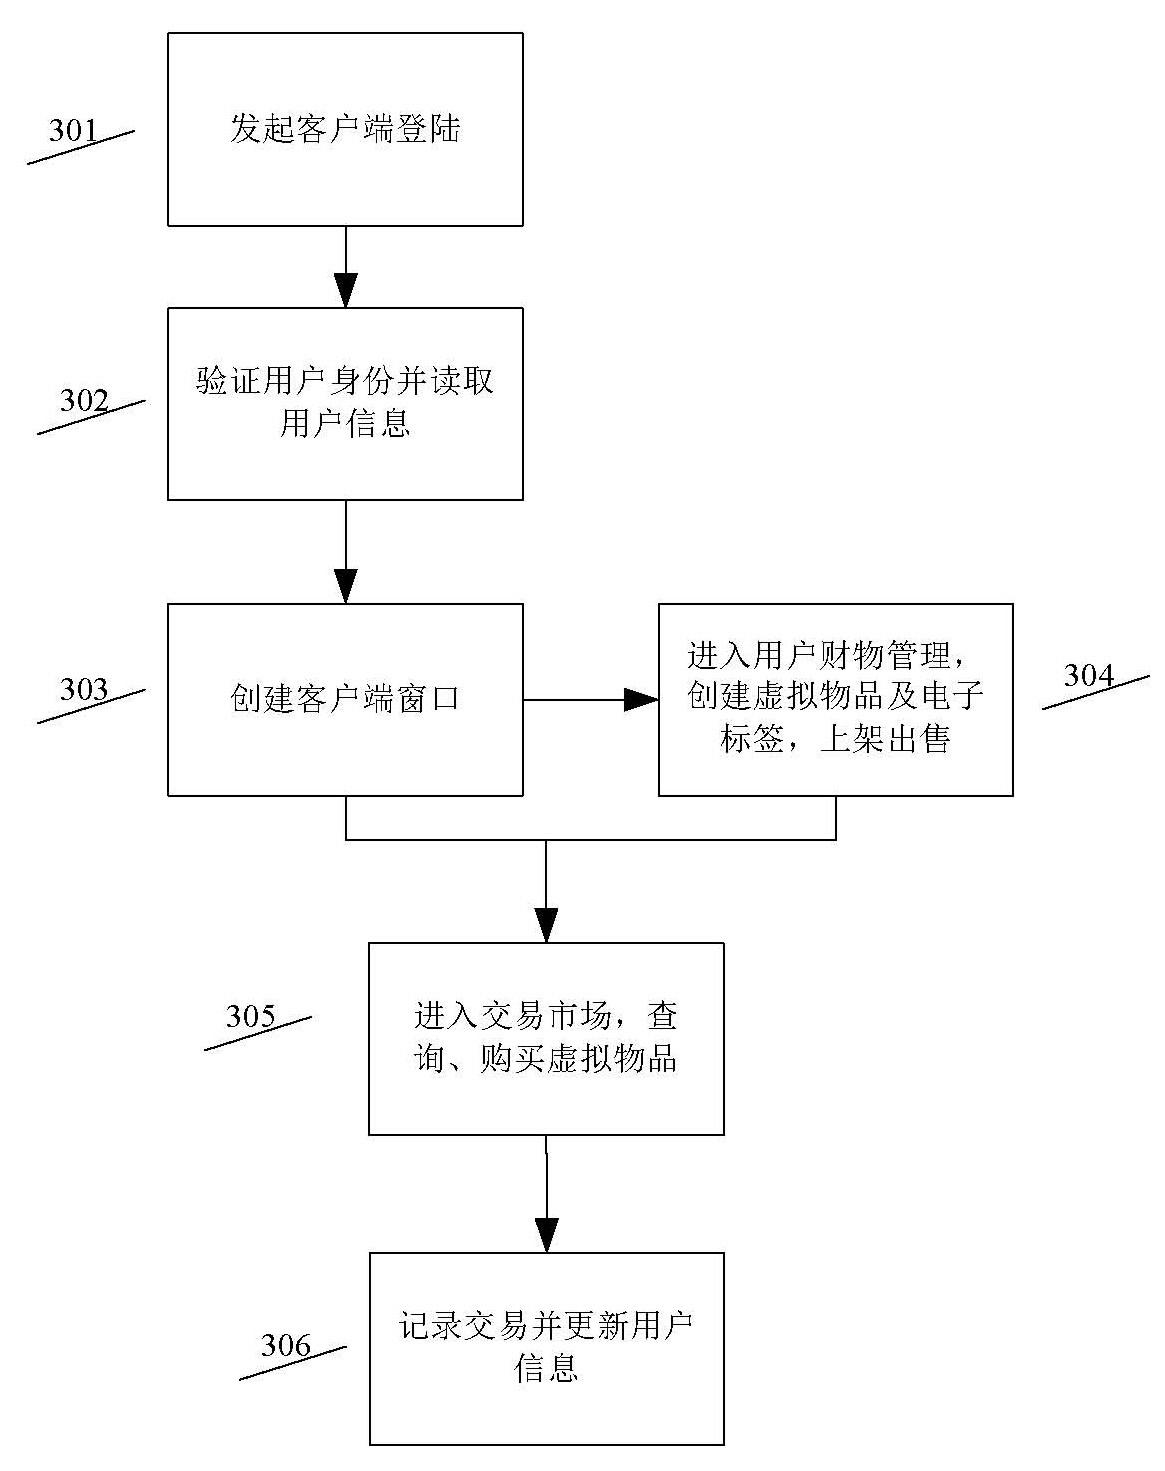 Virtual item trading method and system using electronic tags